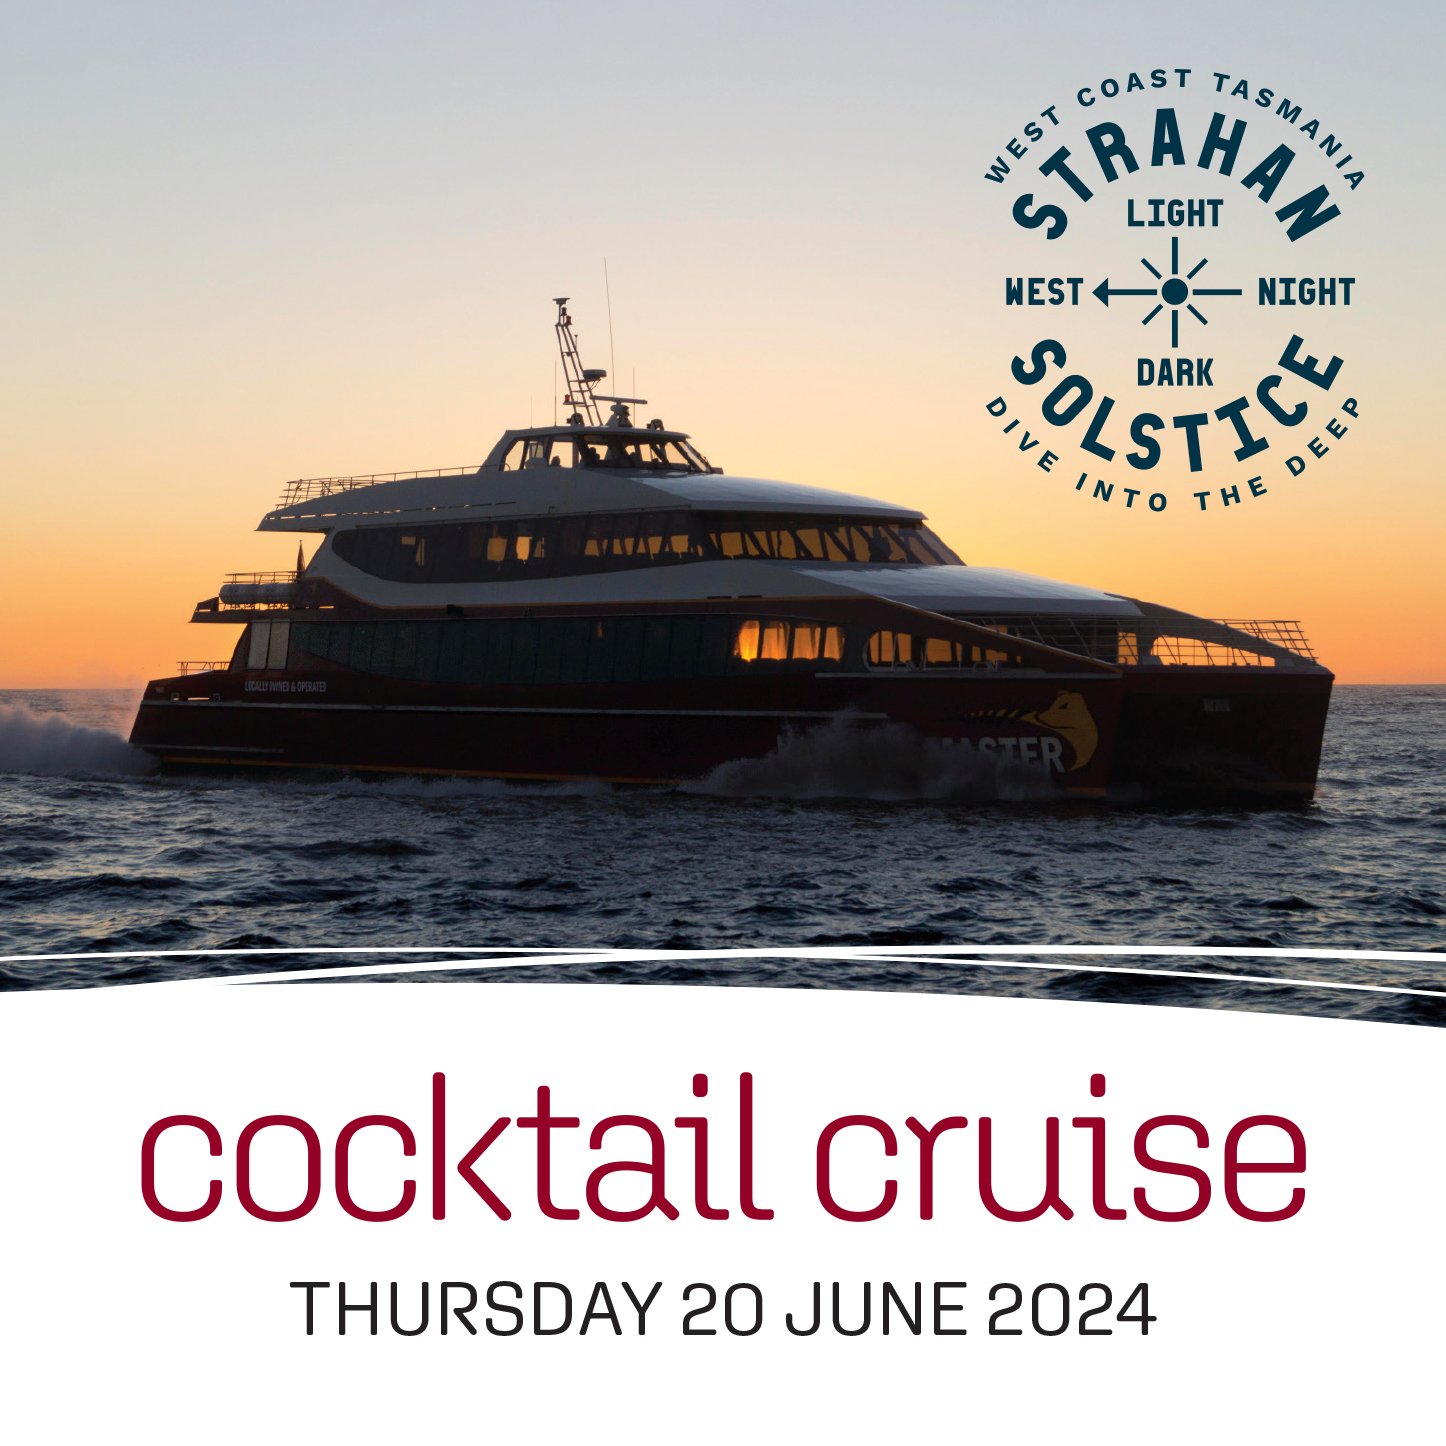 Dress up in your best red outfit and join us for our winter solstice cocktail cruise on June 20th for a fabulous evening of entertainment and cocktails!!! 

More details and to book: https://www.worldheritagecruises.com.au/events